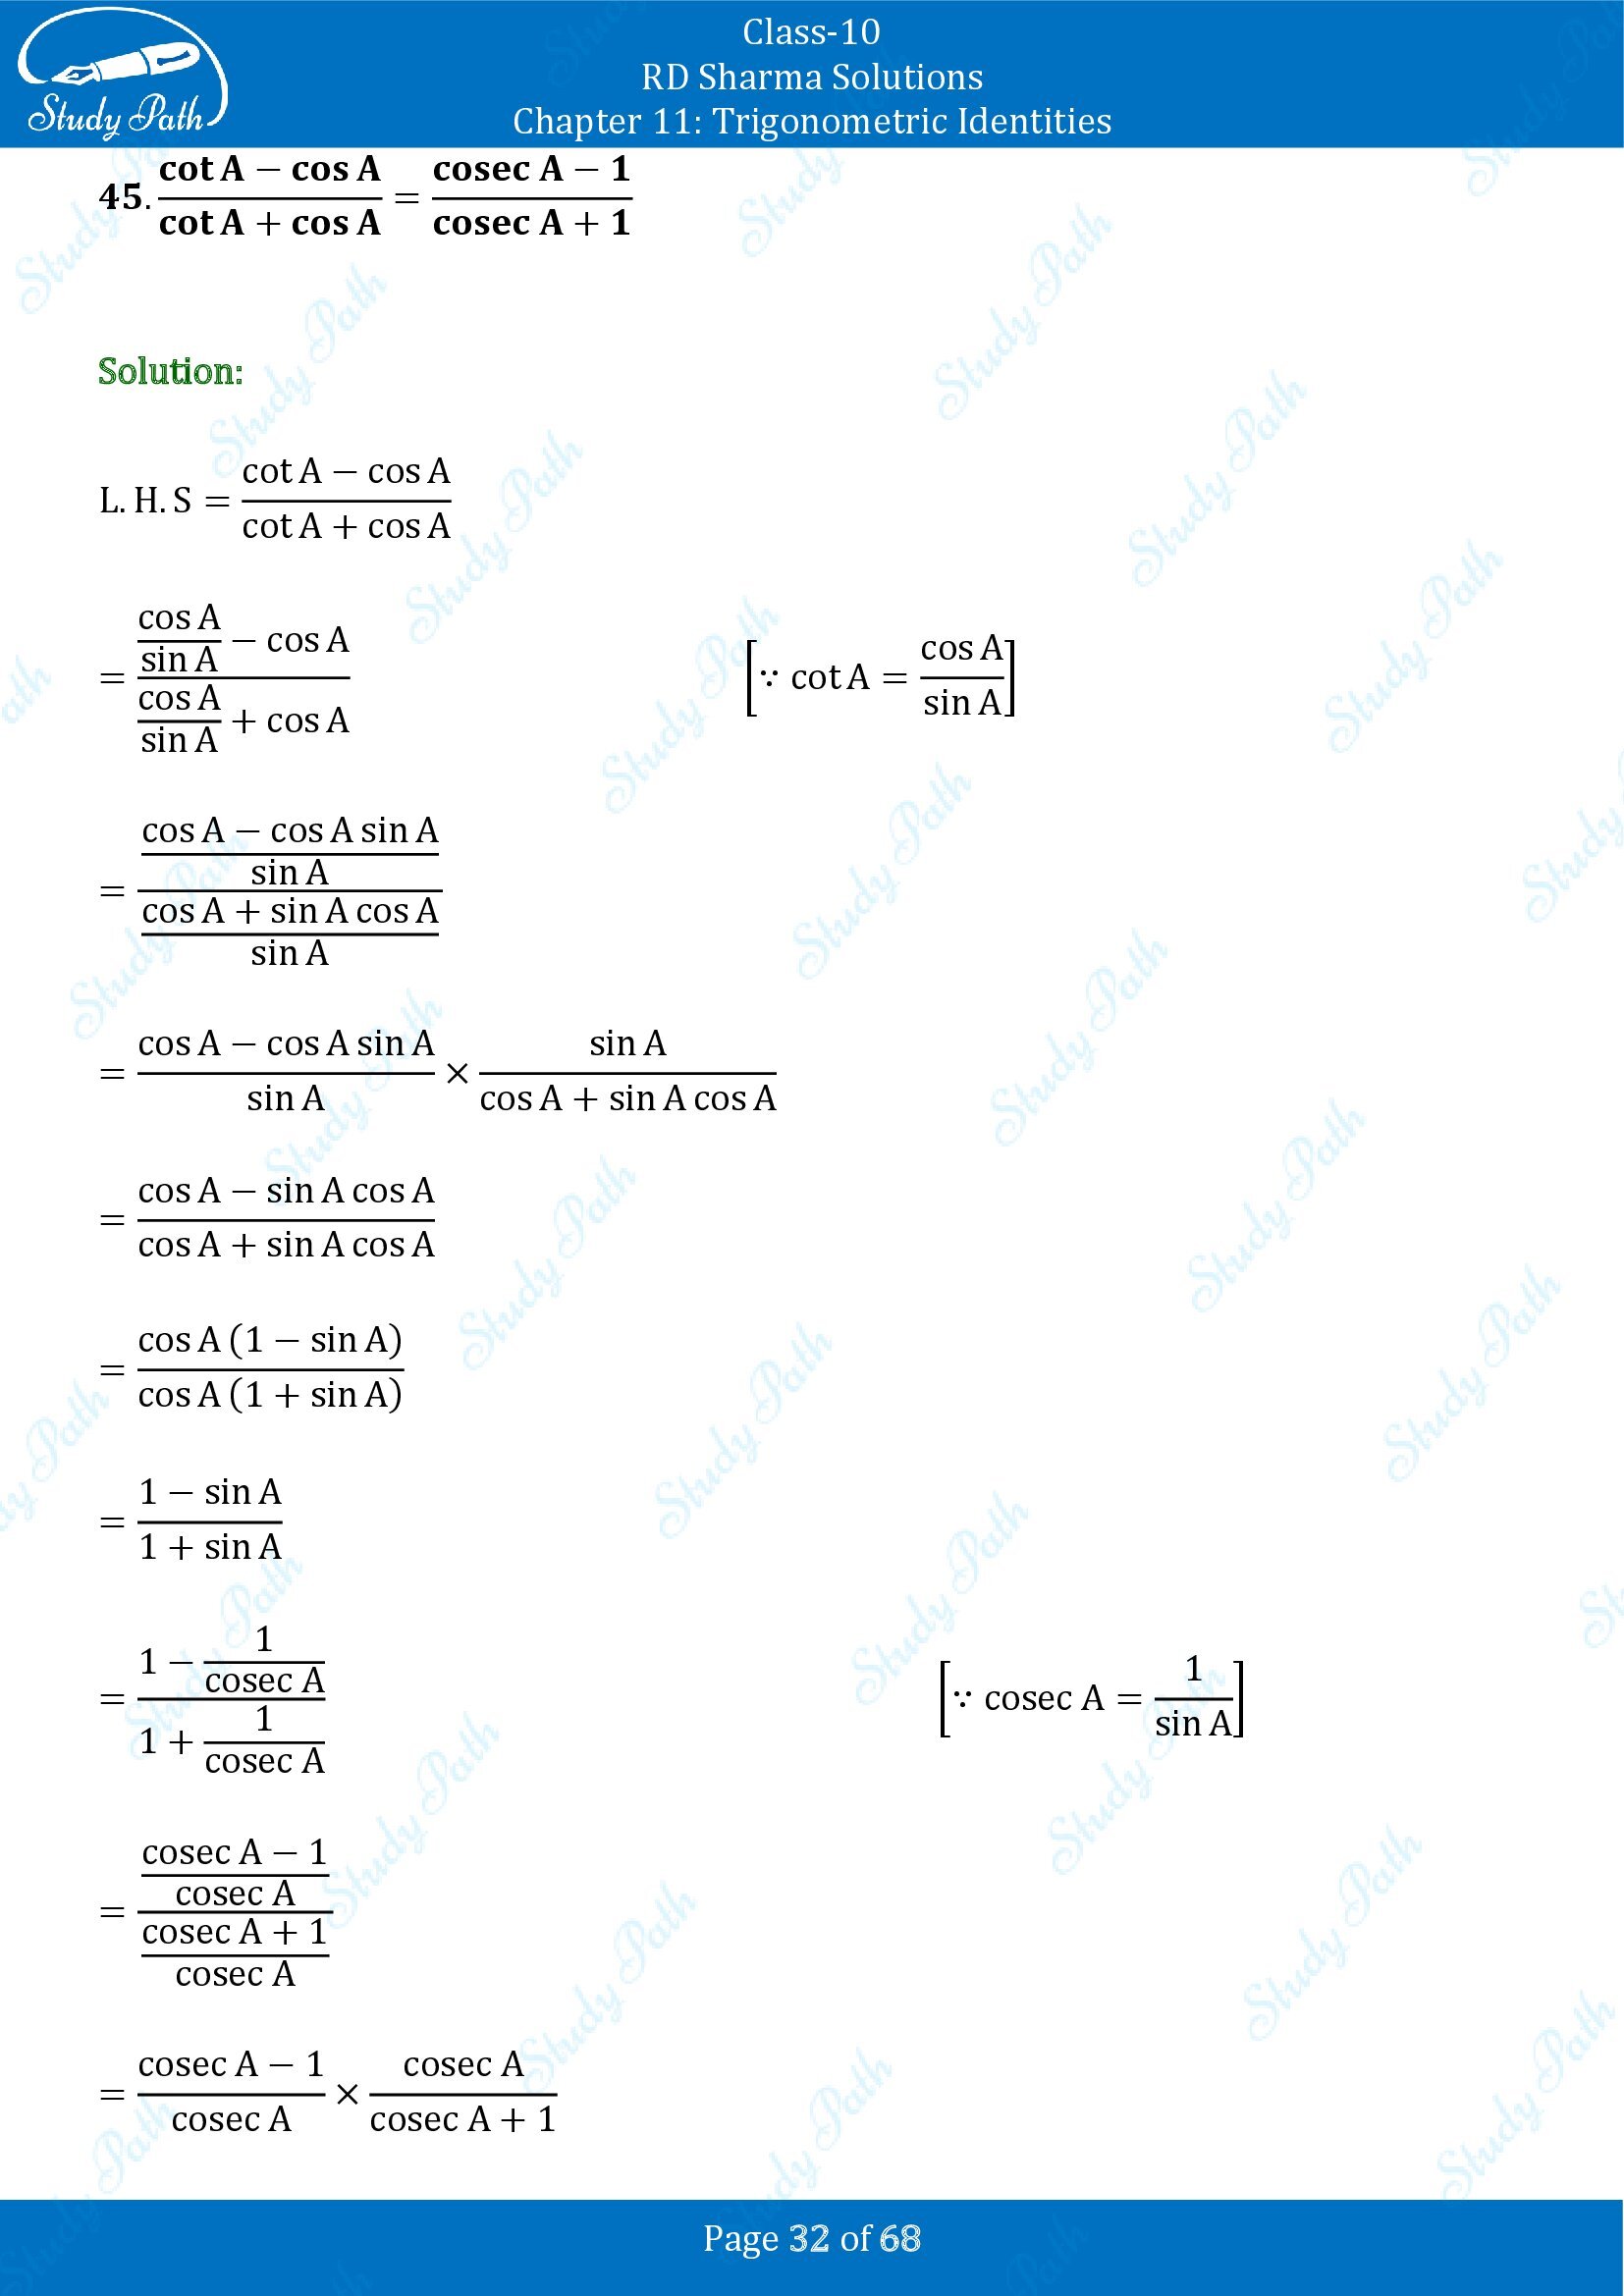 RD Sharma Solutions Class 10 Chapter 11 Trigonometric Identities Exercise 11.1 00032